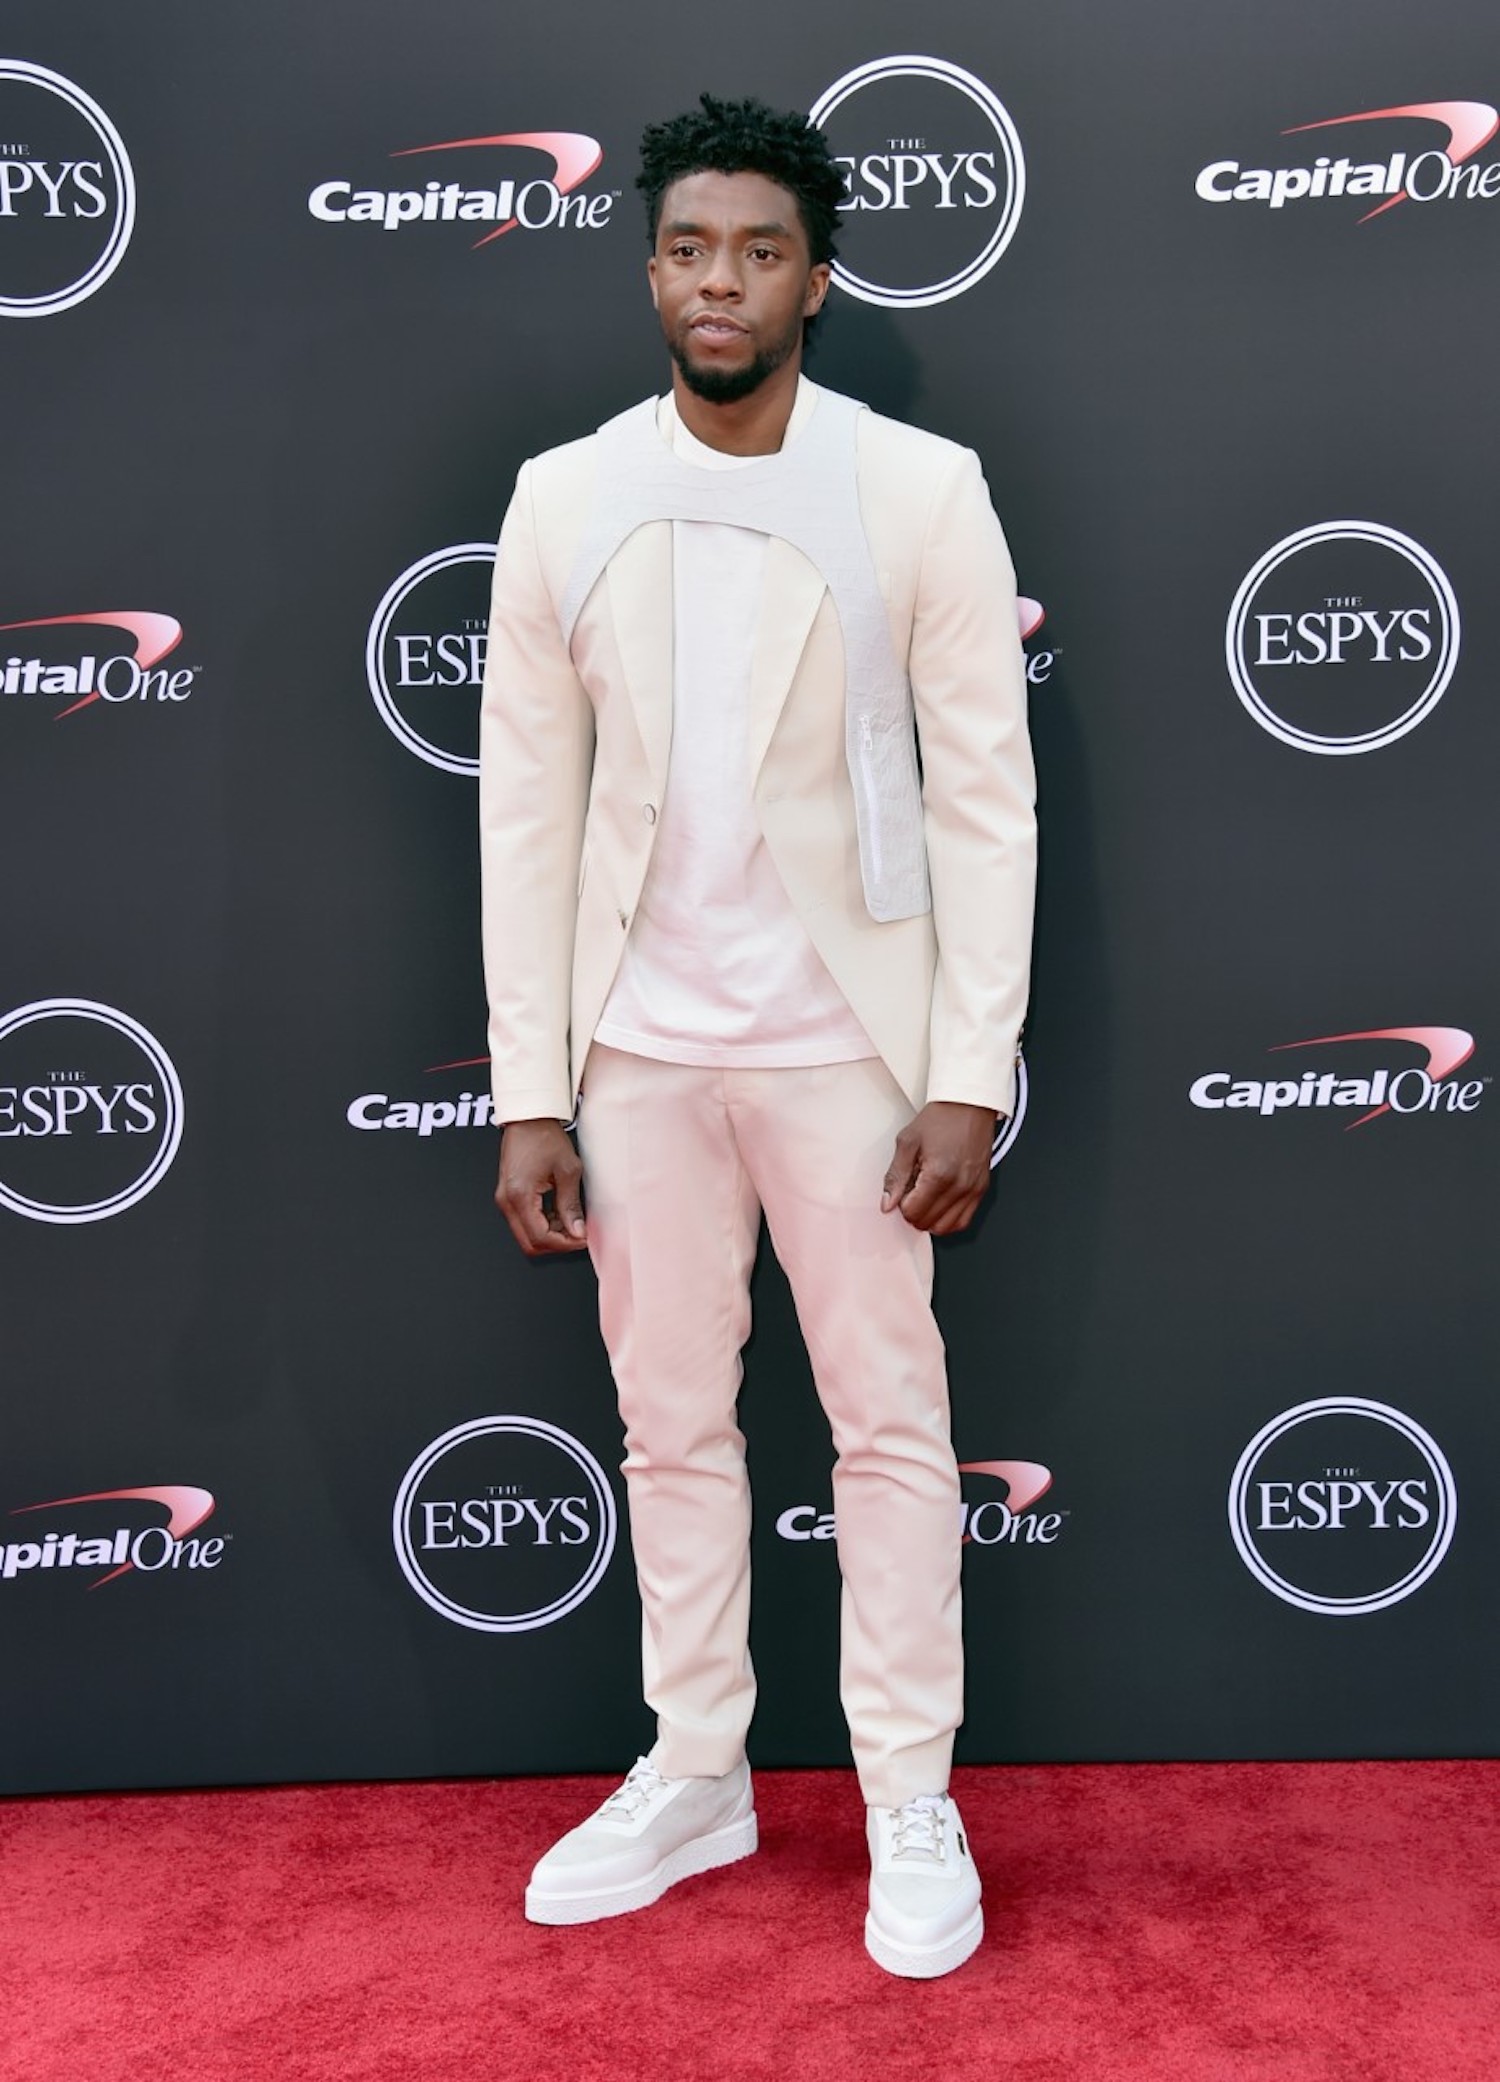 SPOTTED: Chadwick Boseman Turns Out in Louis Vuitton at ESPY Awards